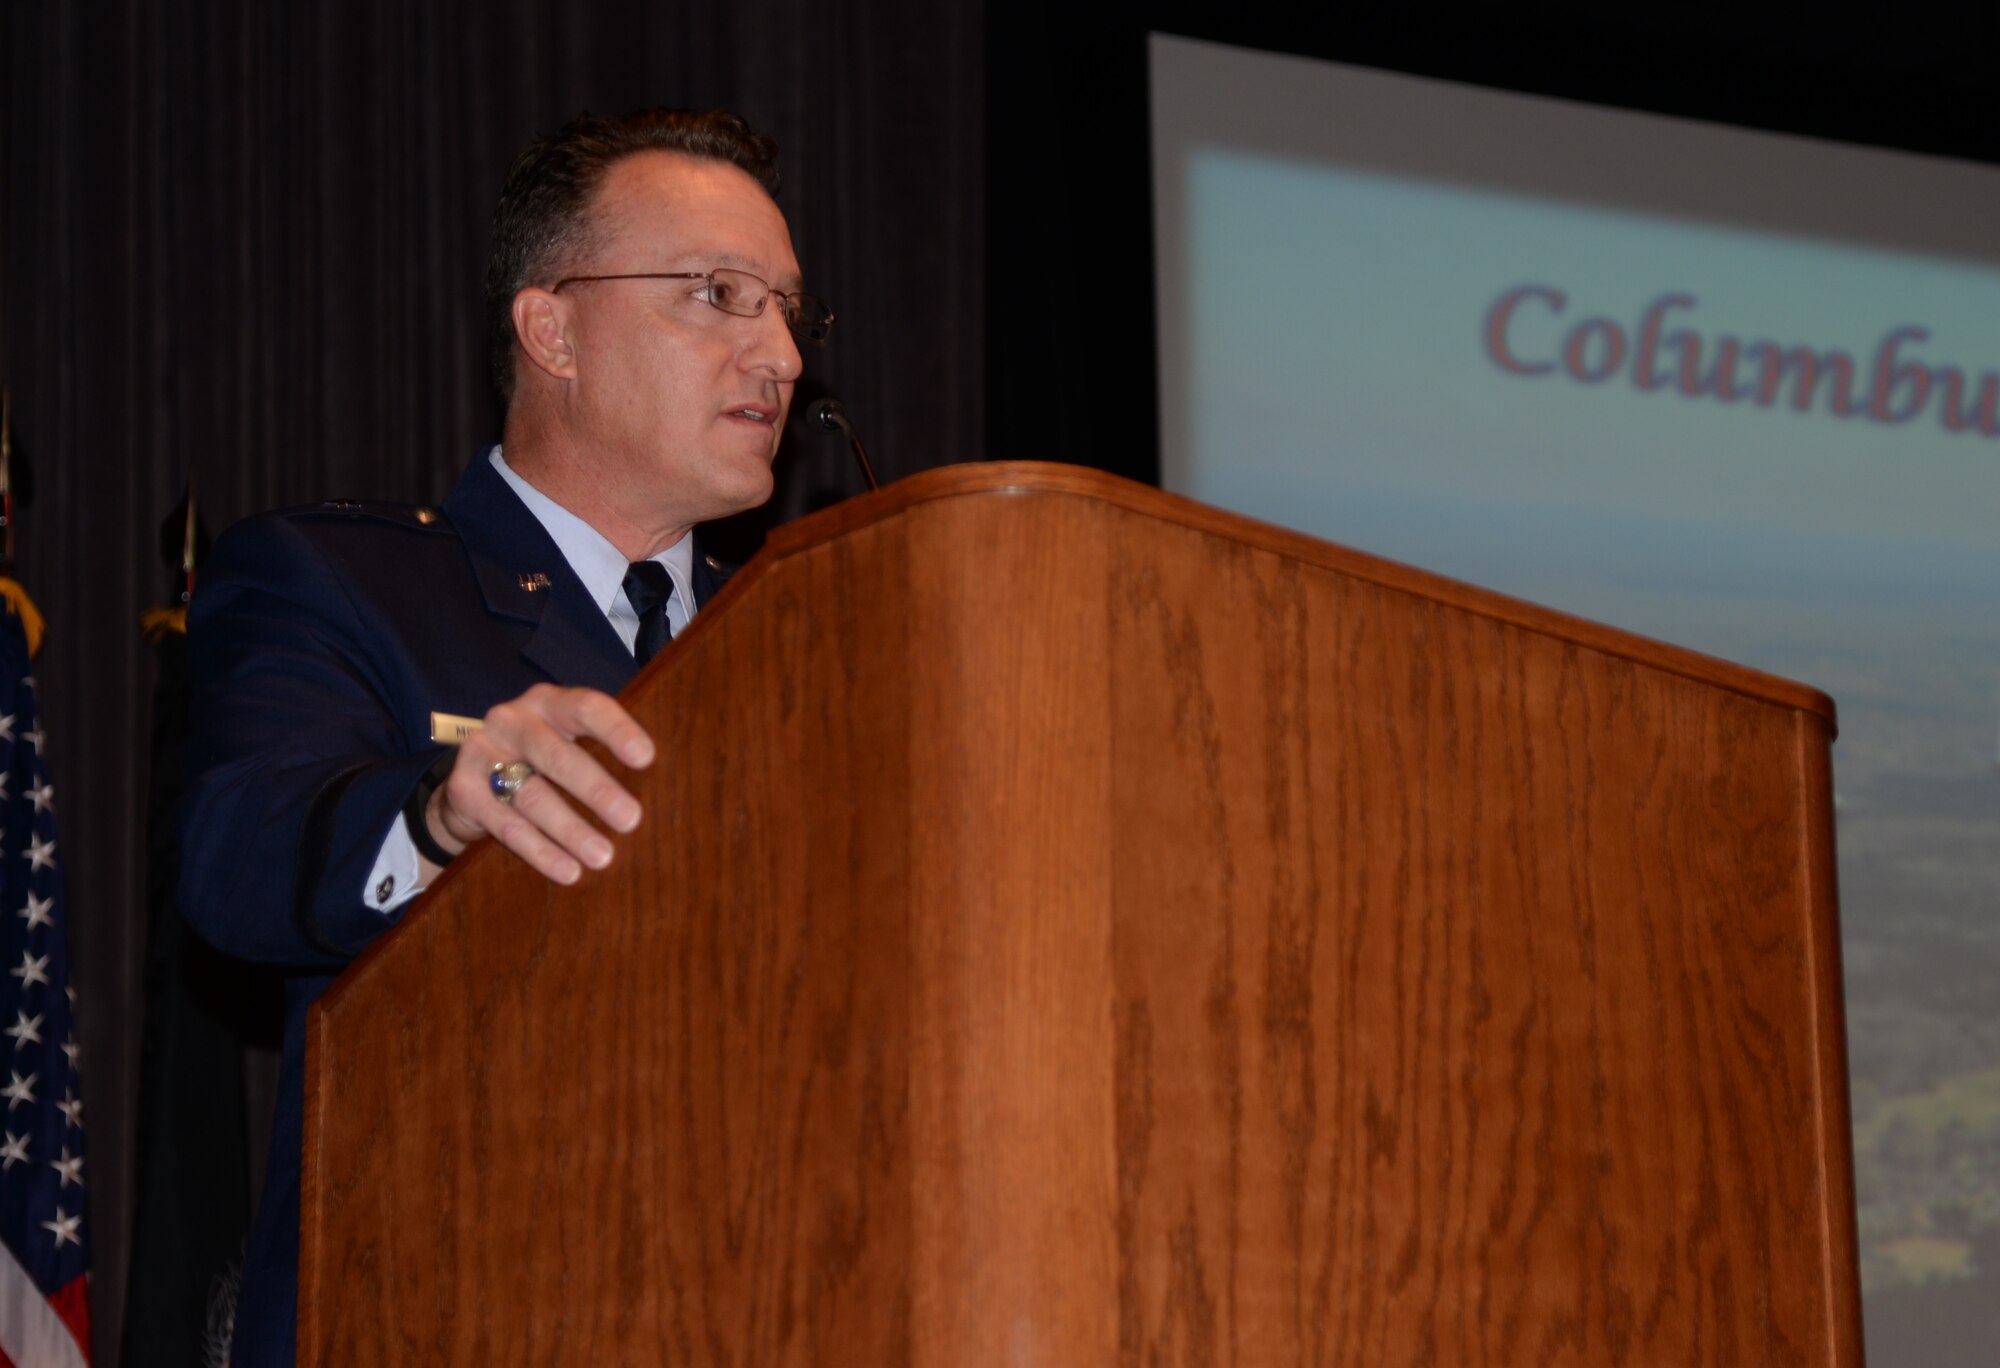 Brig. Gen. Patrick Mordente, 18th Air Force Vice Commander, Scott Air Force Base, Illinois, speaks at the Specialized Undergraduate Pilot Training Class 16-10 graduation June 10 at Columbus Air Force Base, Mississippi. Aside from being the keynote speaker at graduation, Mordente also came to celebrate 28 years from the exact day he graduated from UPT at Columbus AFB. (U.S. Air Force photo/Airman 1st Class John Day)